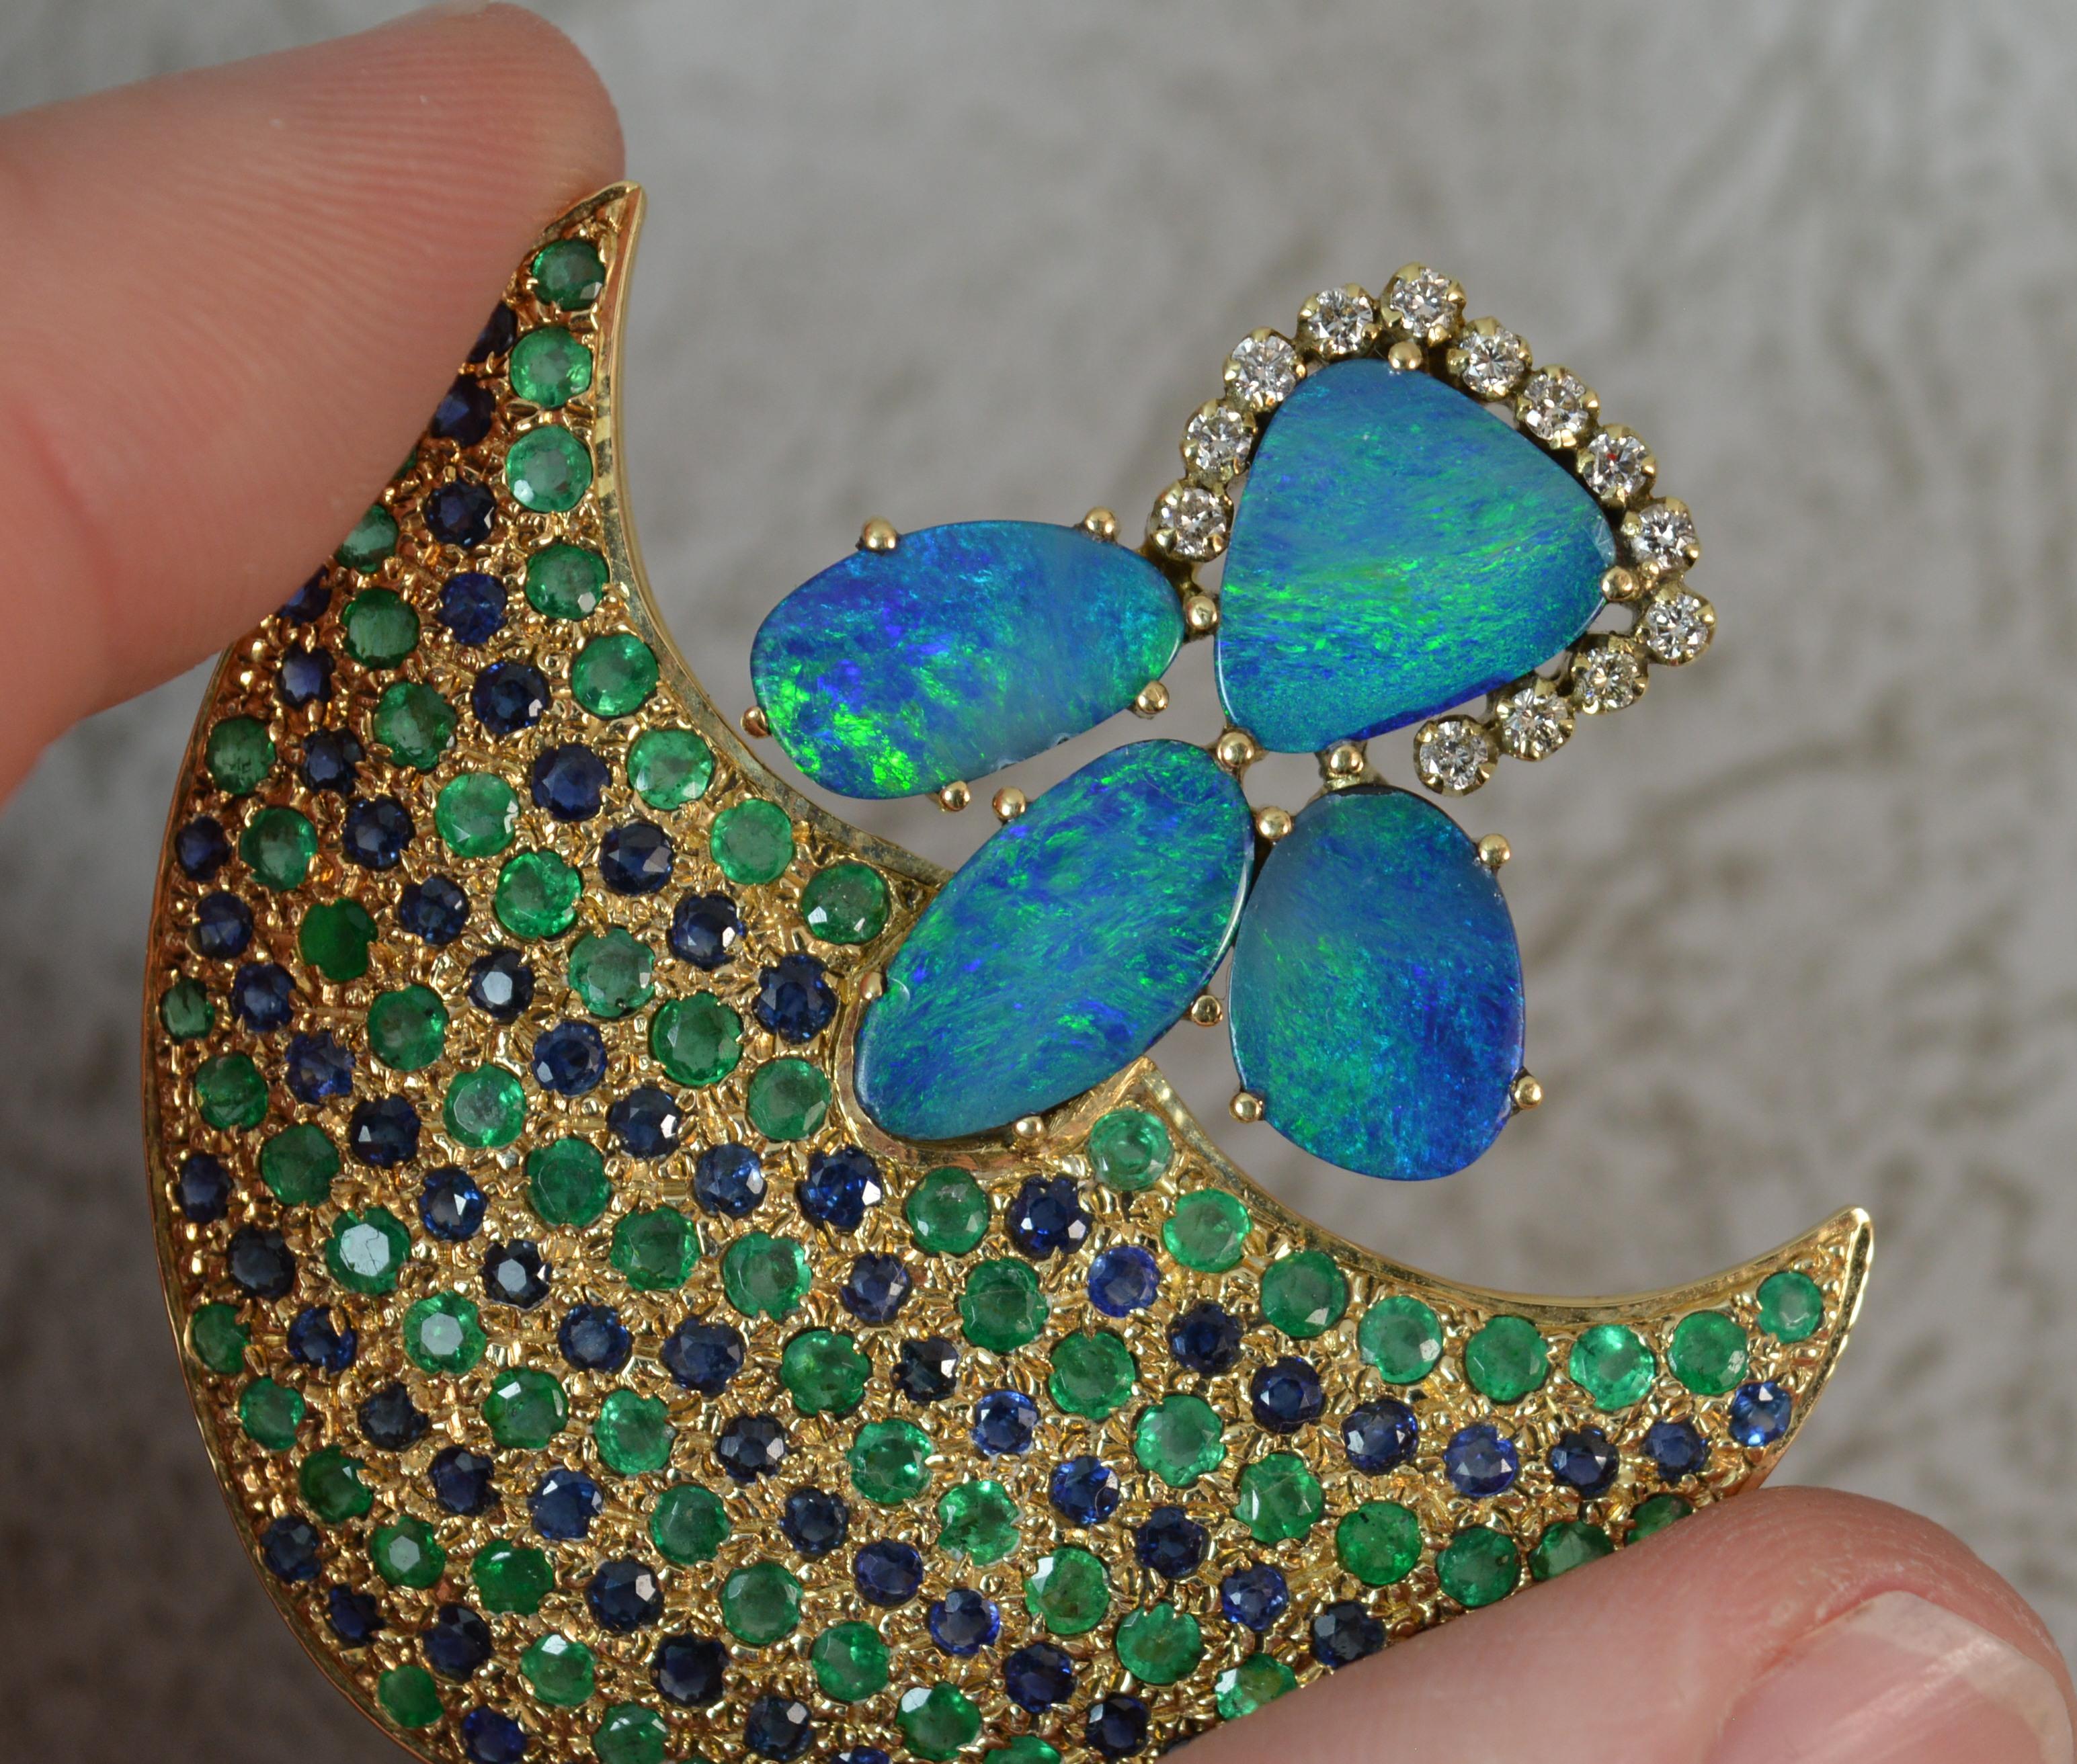 A stunning 14 carat gold brooch.

Unusually shaped, perhaps an arrow, or even a fish.

Set with many round cut rows of alternating green emeralds and blue sapphires to the main body. The end set with four opal doublets which are surrounded by small